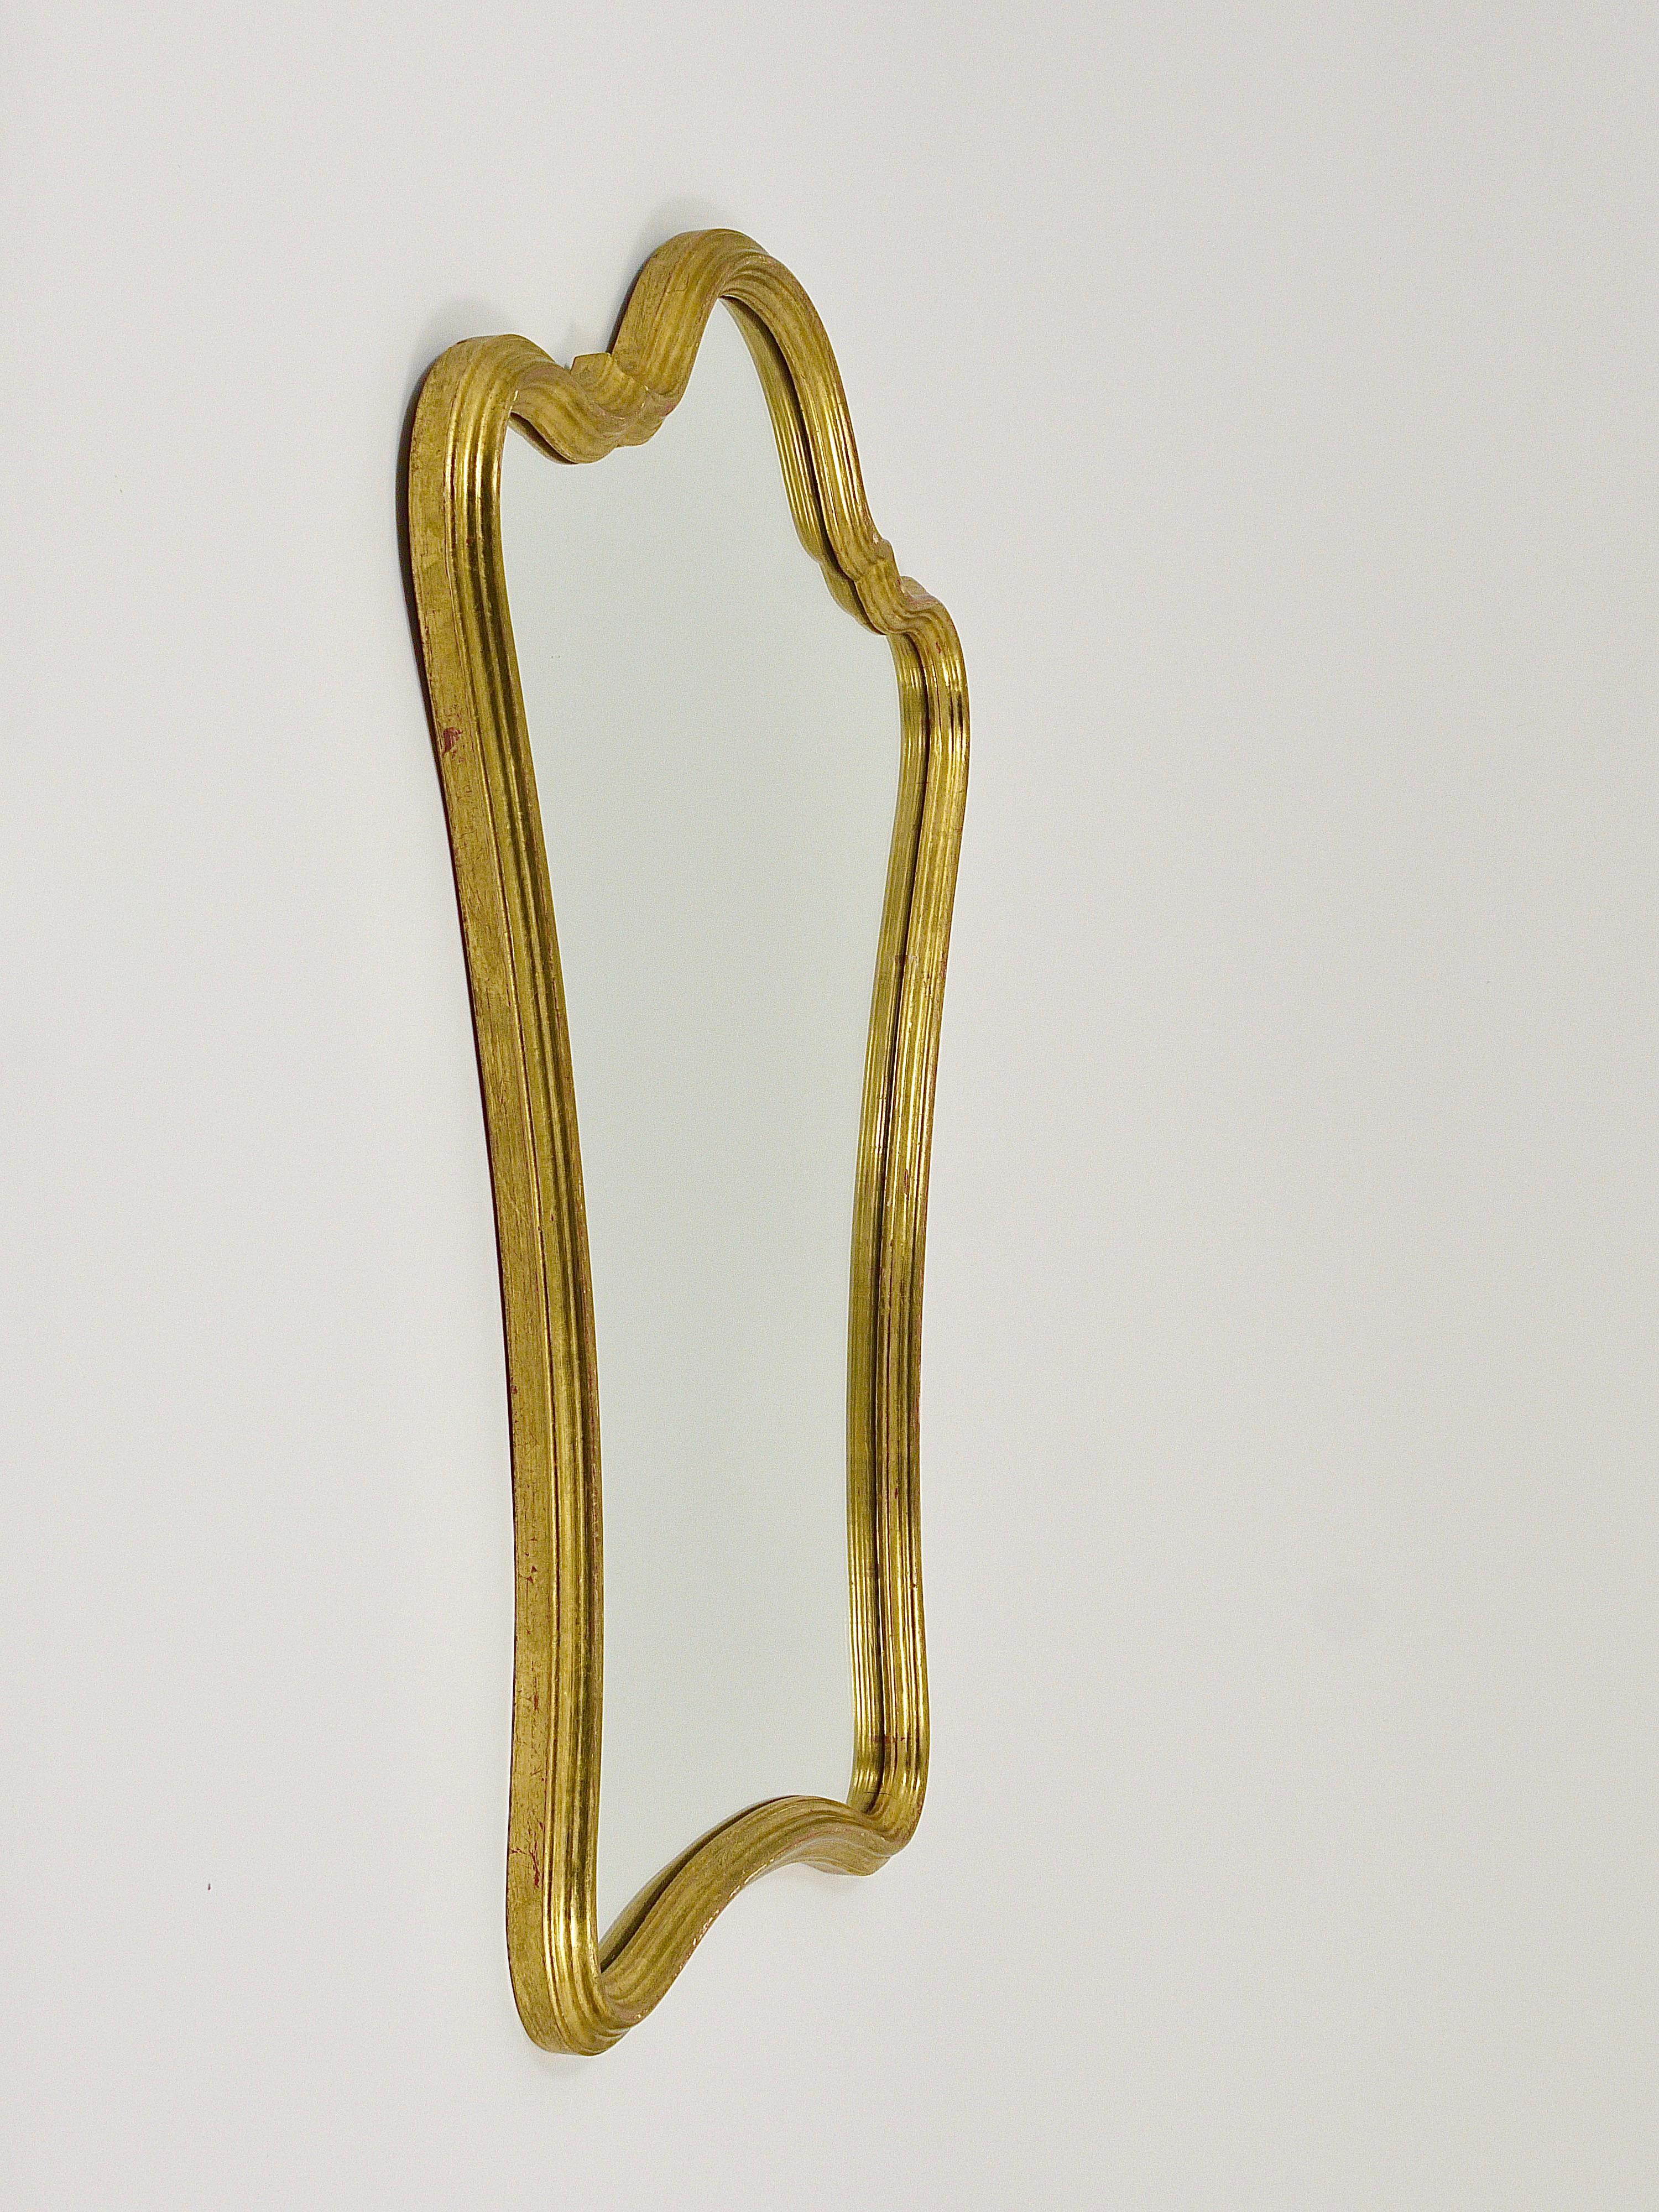 Chelini Firenze Curved Gilt Wood Mid-Century Wall Mirror, Italy, 1950s For Sale 2